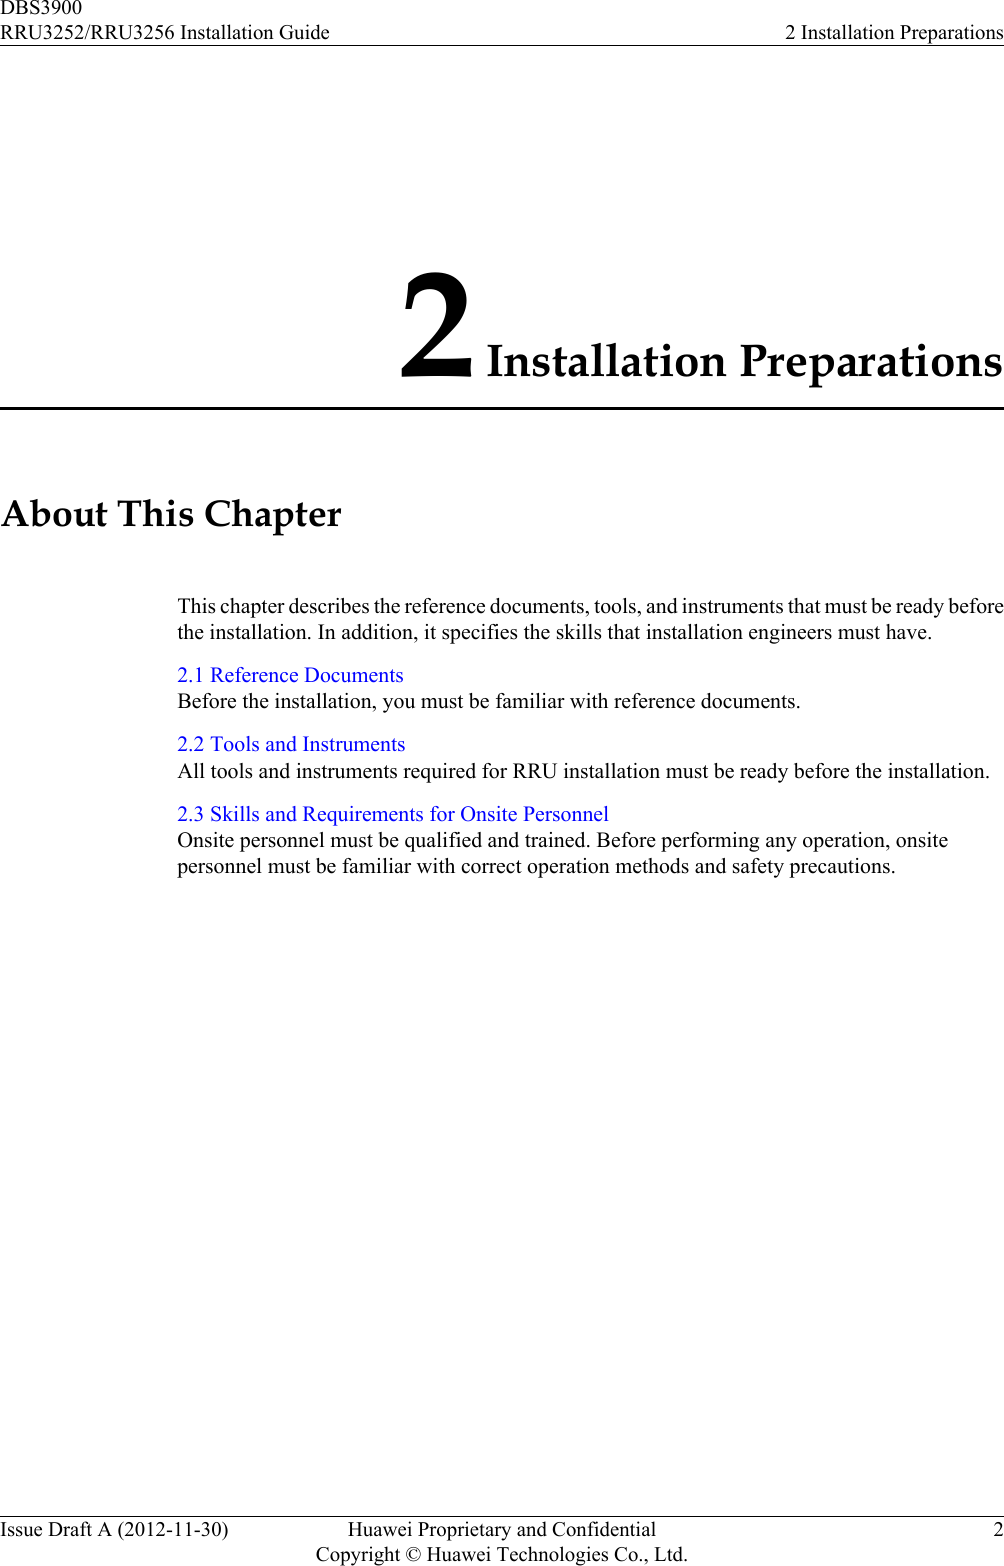 2 Installation PreparationsAbout This ChapterThis chapter describes the reference documents, tools, and instruments that must be ready beforethe installation. In addition, it specifies the skills that installation engineers must have.2.1 Reference DocumentsBefore the installation, you must be familiar with reference documents.2.2 Tools and InstrumentsAll tools and instruments required for RRU installation must be ready before the installation.2.3 Skills and Requirements for Onsite PersonnelOnsite personnel must be qualified and trained. Before performing any operation, onsitepersonnel must be familiar with correct operation methods and safety precautions.DBS3900RRU3252/RRU3256 Installation Guide 2 Installation PreparationsIssue Draft A (2012-11-30) Huawei Proprietary and ConfidentialCopyright © Huawei Technologies Co., Ltd.2